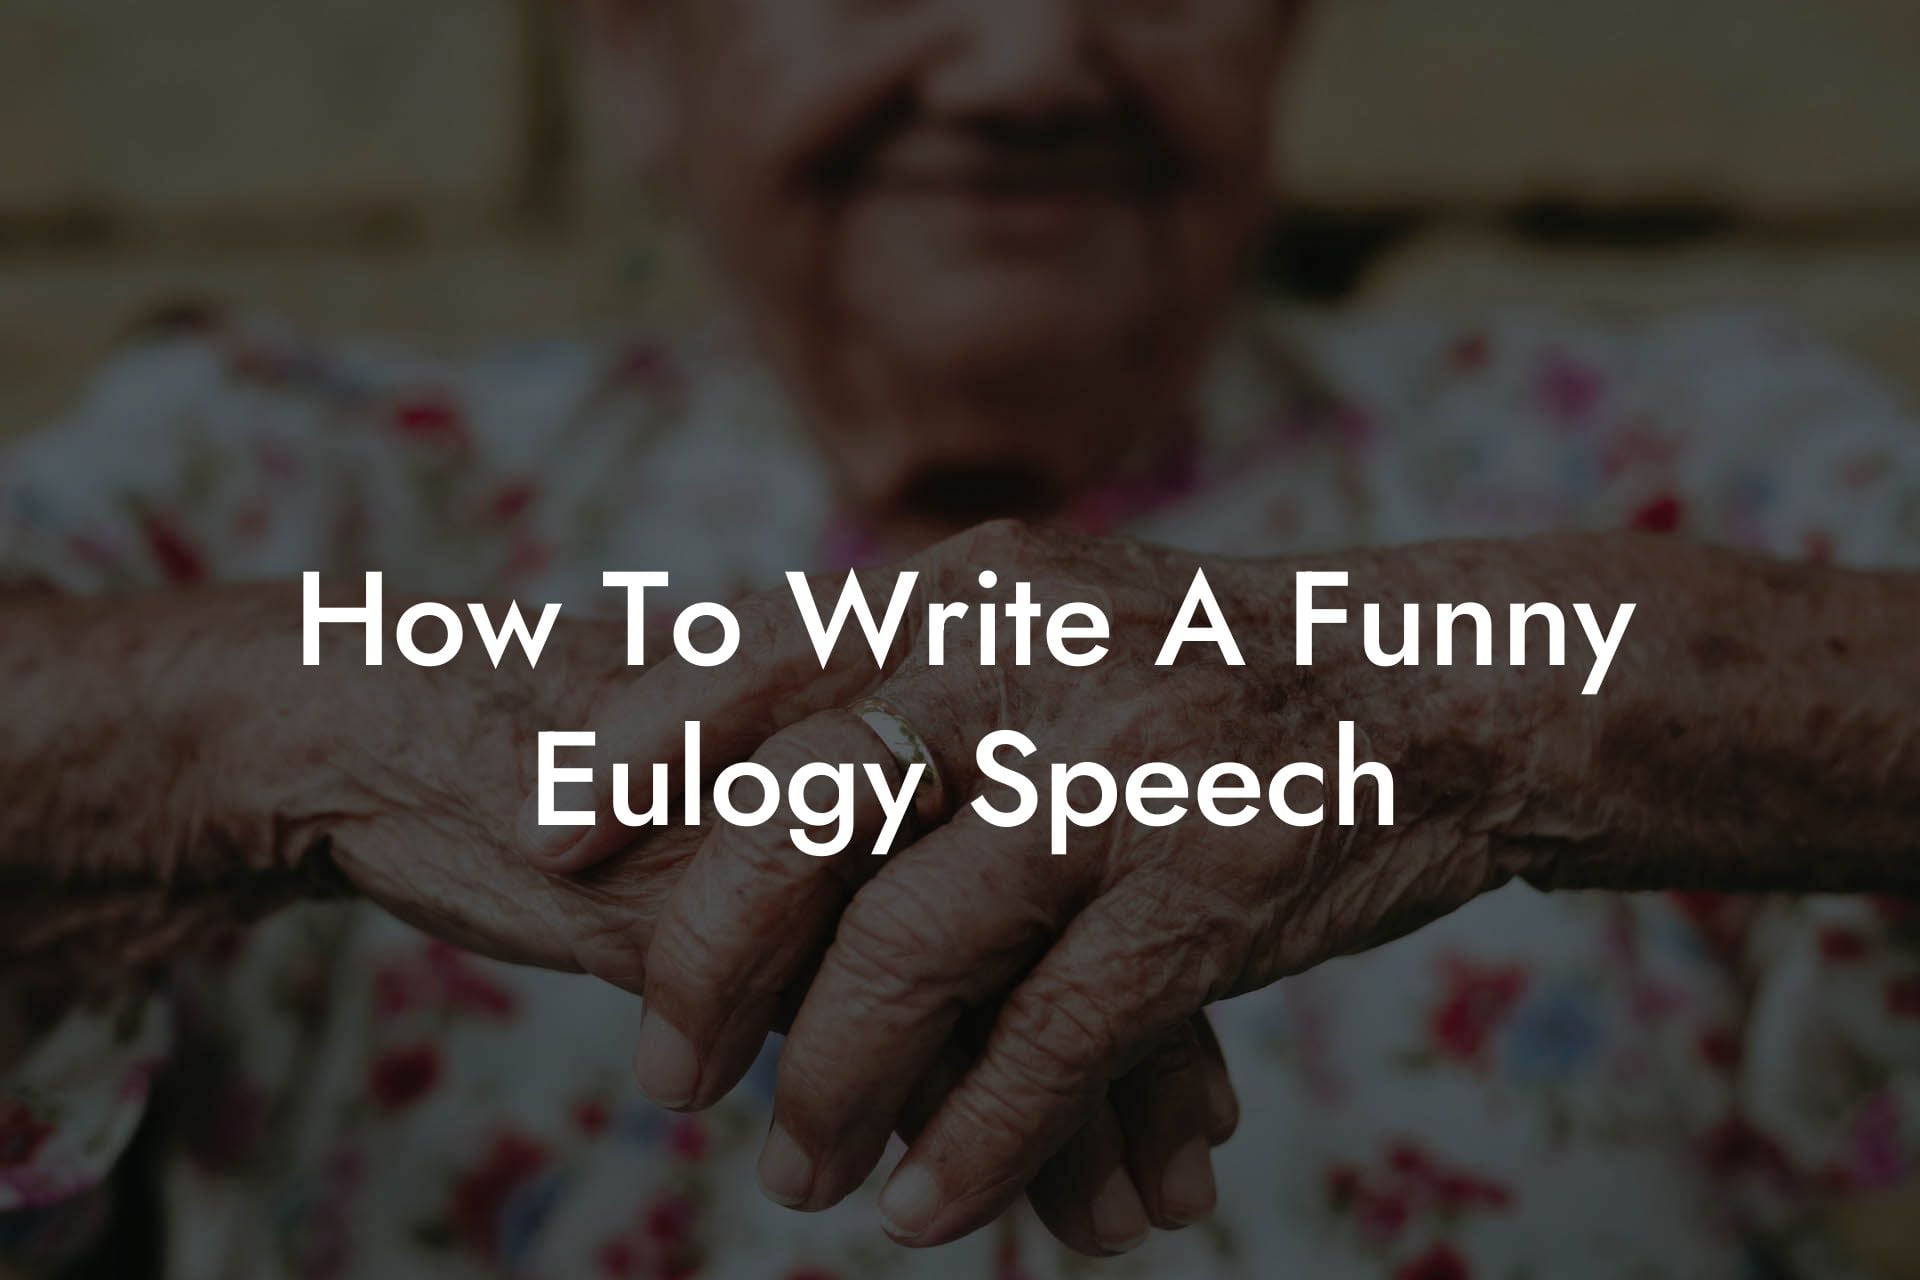 How To Write A Funny Eulogy Speech